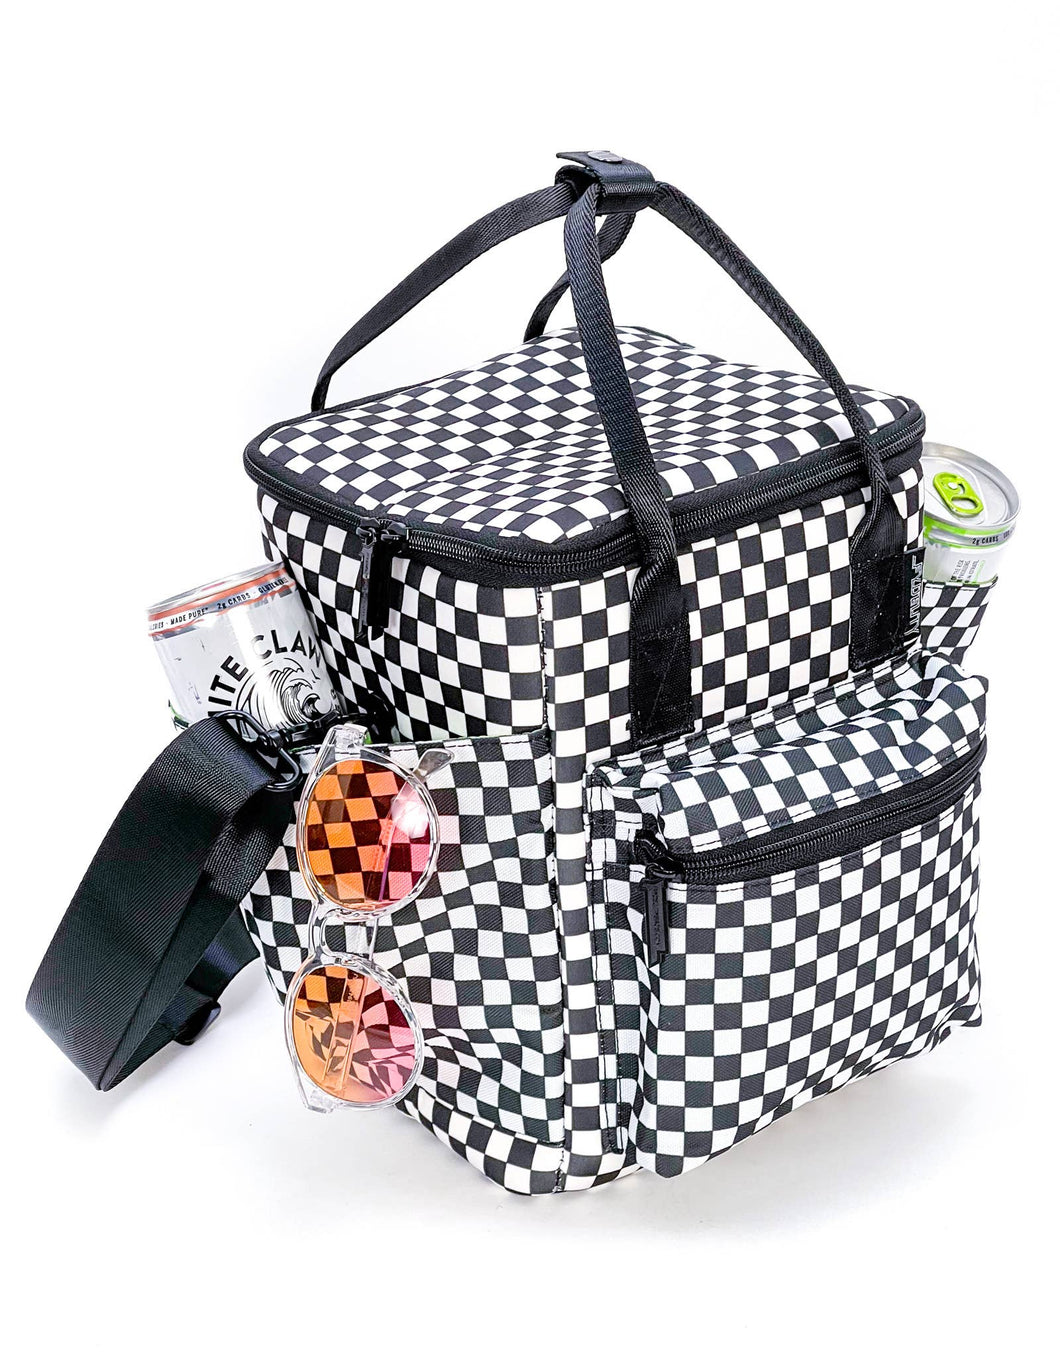 Black and white checkered cooler bag with shoulder strap that can be attached.  Shows cans in each side pocket. 